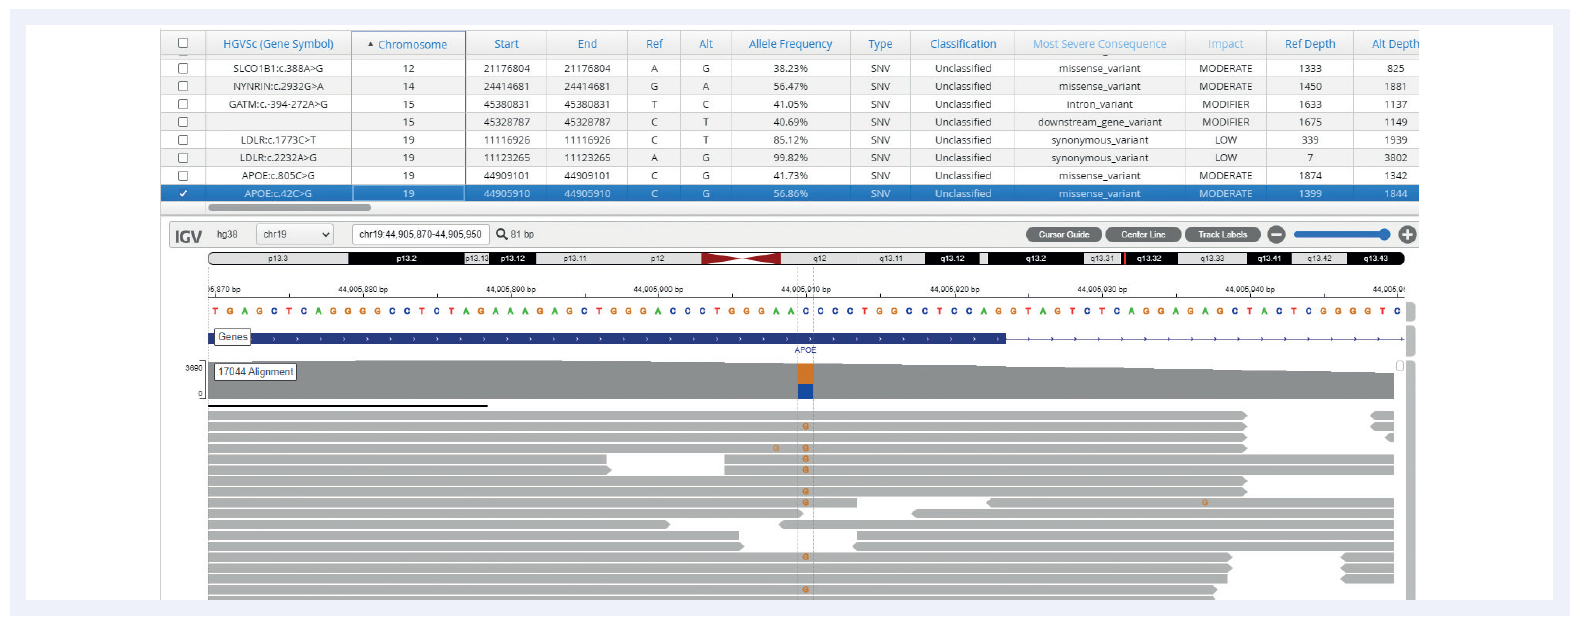 Figure 5: Missense variant on the APOB gene, as visualised by Interpret software.